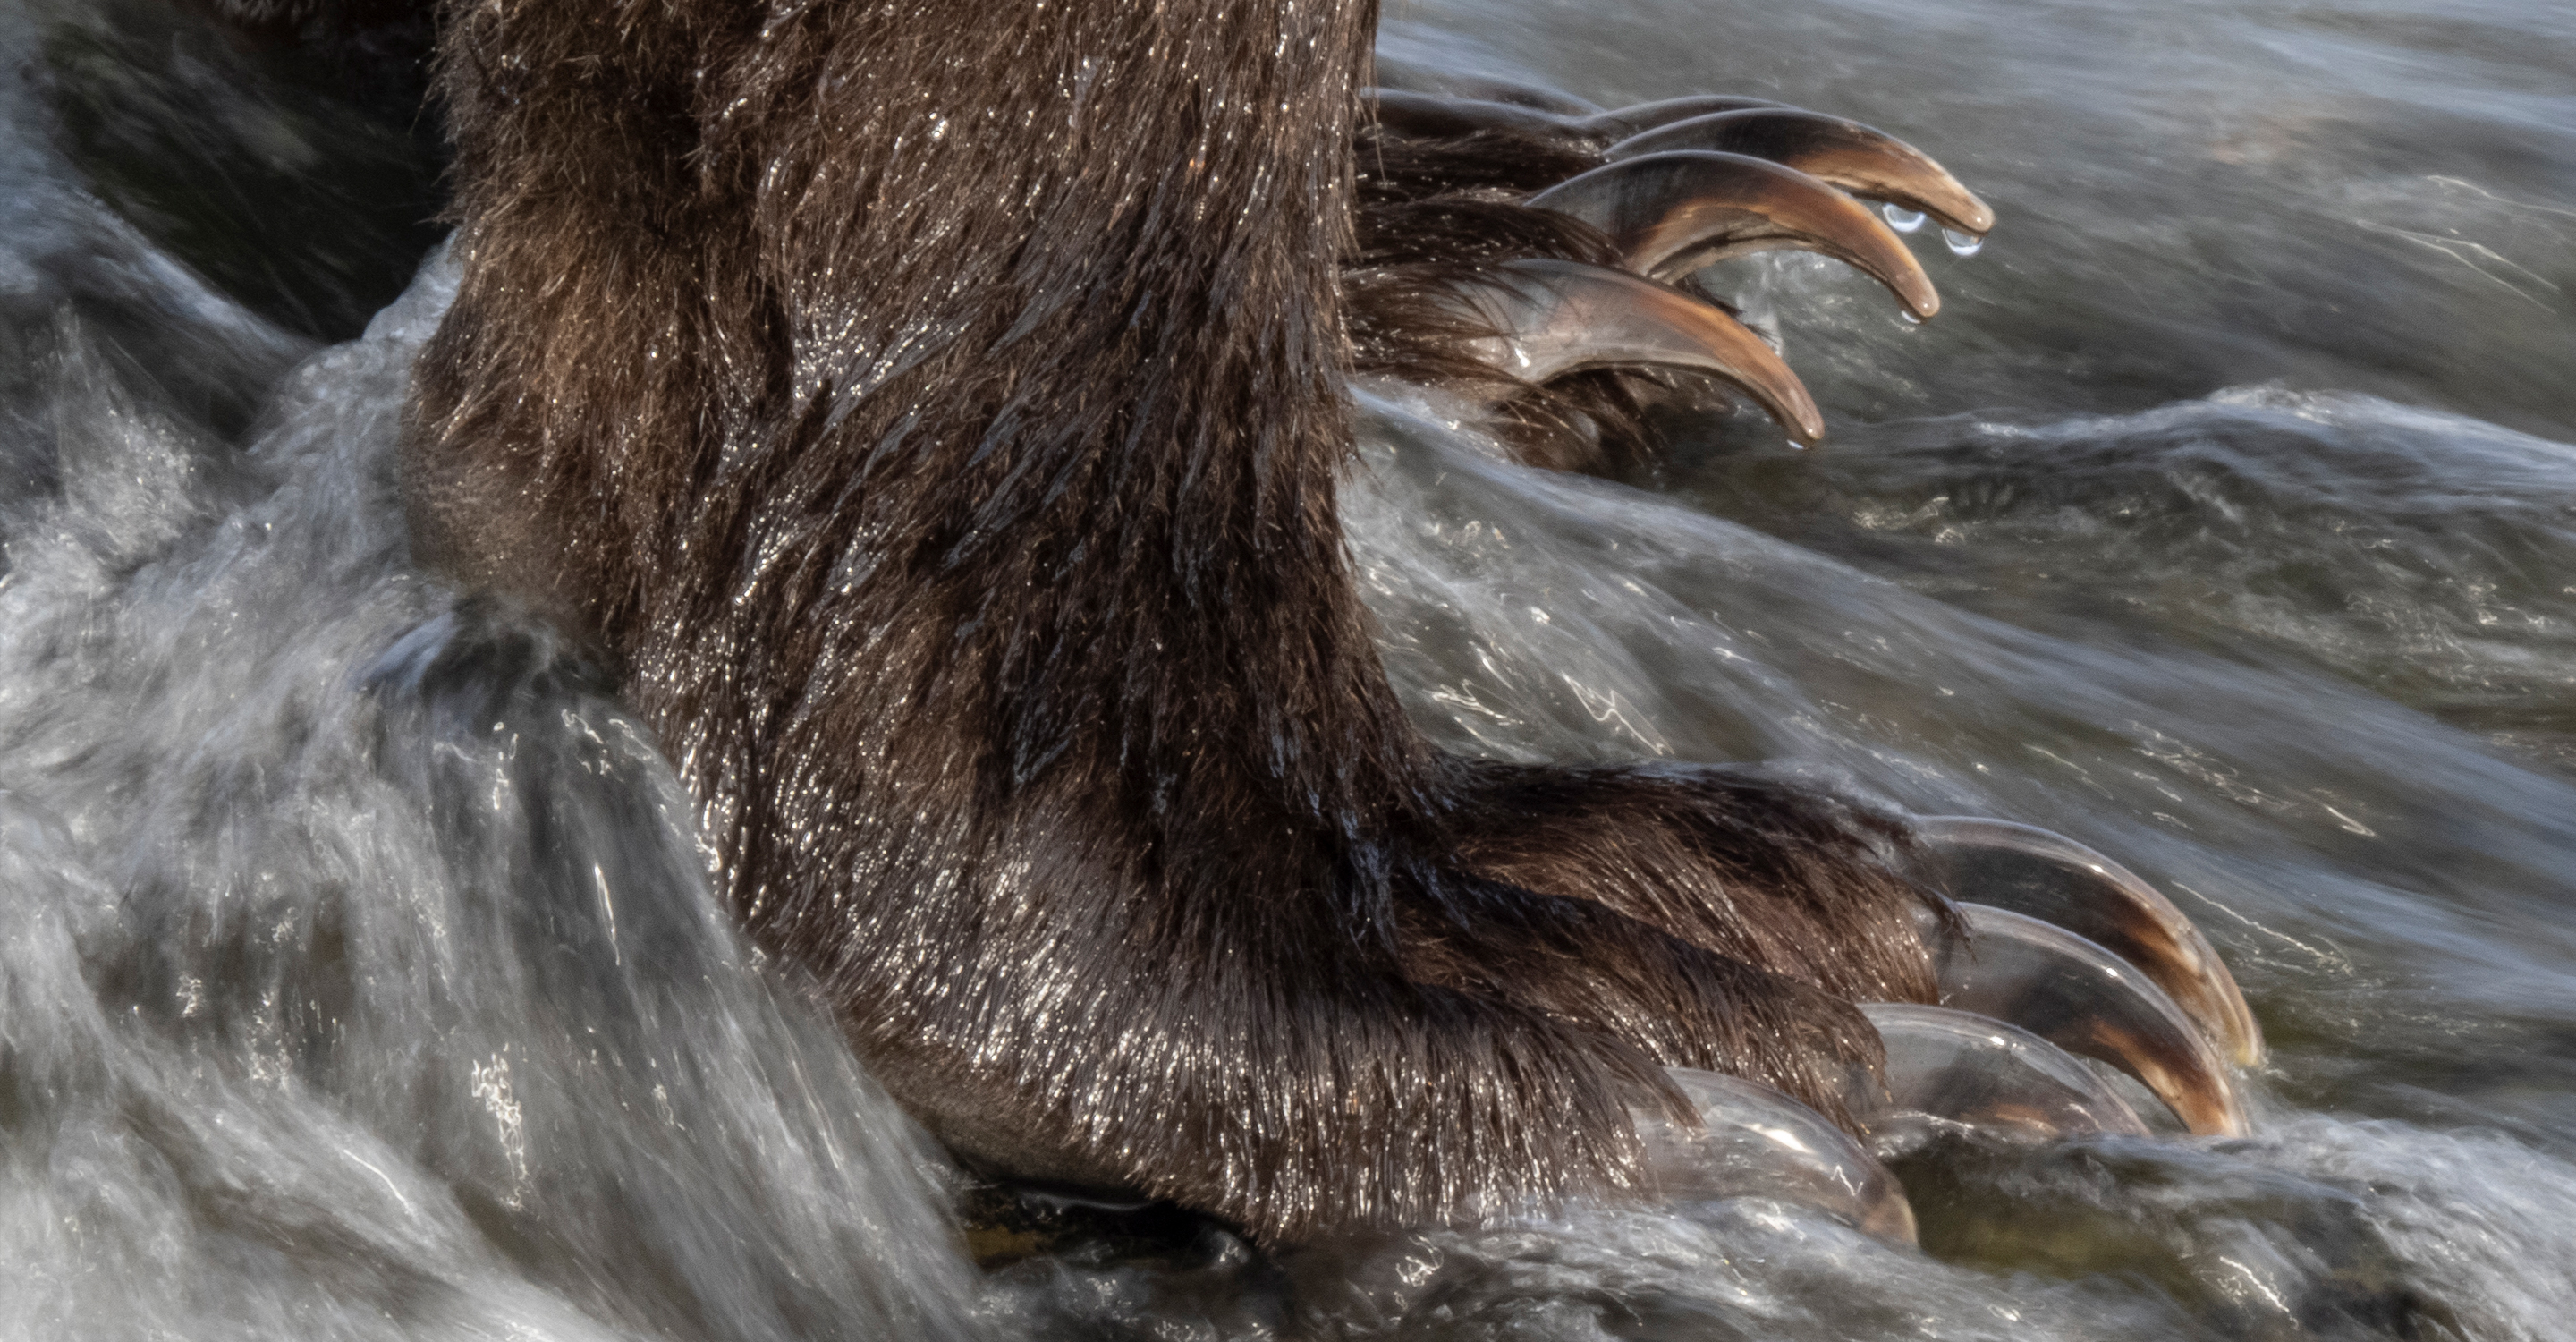 A close up of a brown bear's claws standing in Brooks Falls, Alaska, USA